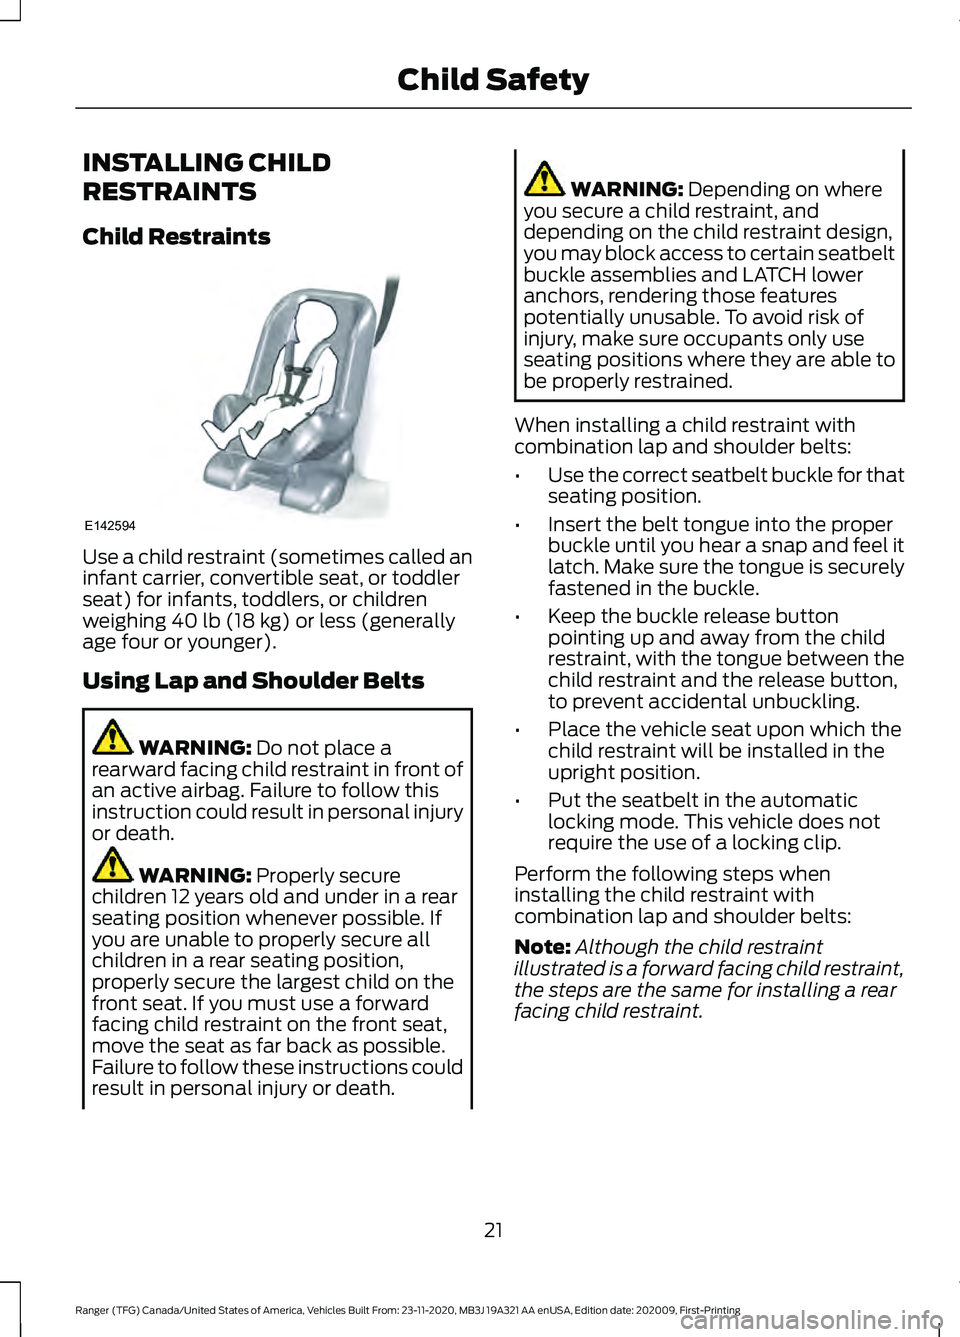 FORD RANGER 2021  Owners Manual INSTALLING CHILD
RESTRAINTS
Child Restraints
Use a child restraint (sometimes called an
infant carrier, convertible seat, or toddler
seat) for infants, toddlers, or children
weighing 40 lb (18 kg) or 